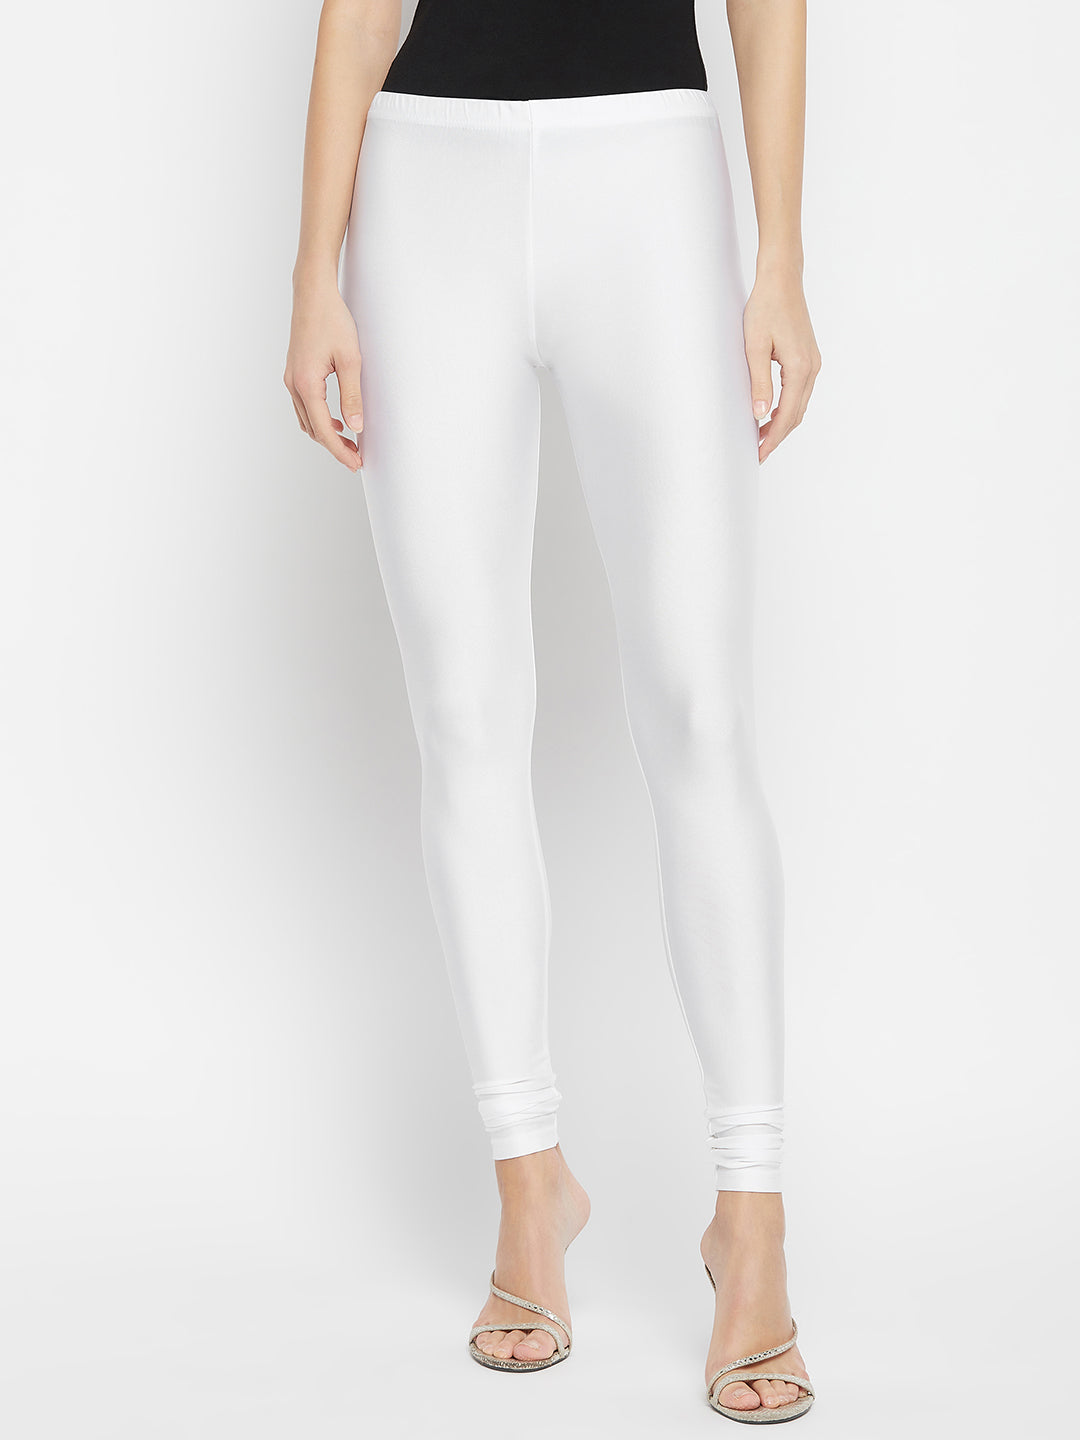 GO COLORS Women White Cotton Churidar Ankle Length Leggings (White, M) in  Chennai at best price by New Mani Textile - Justdial